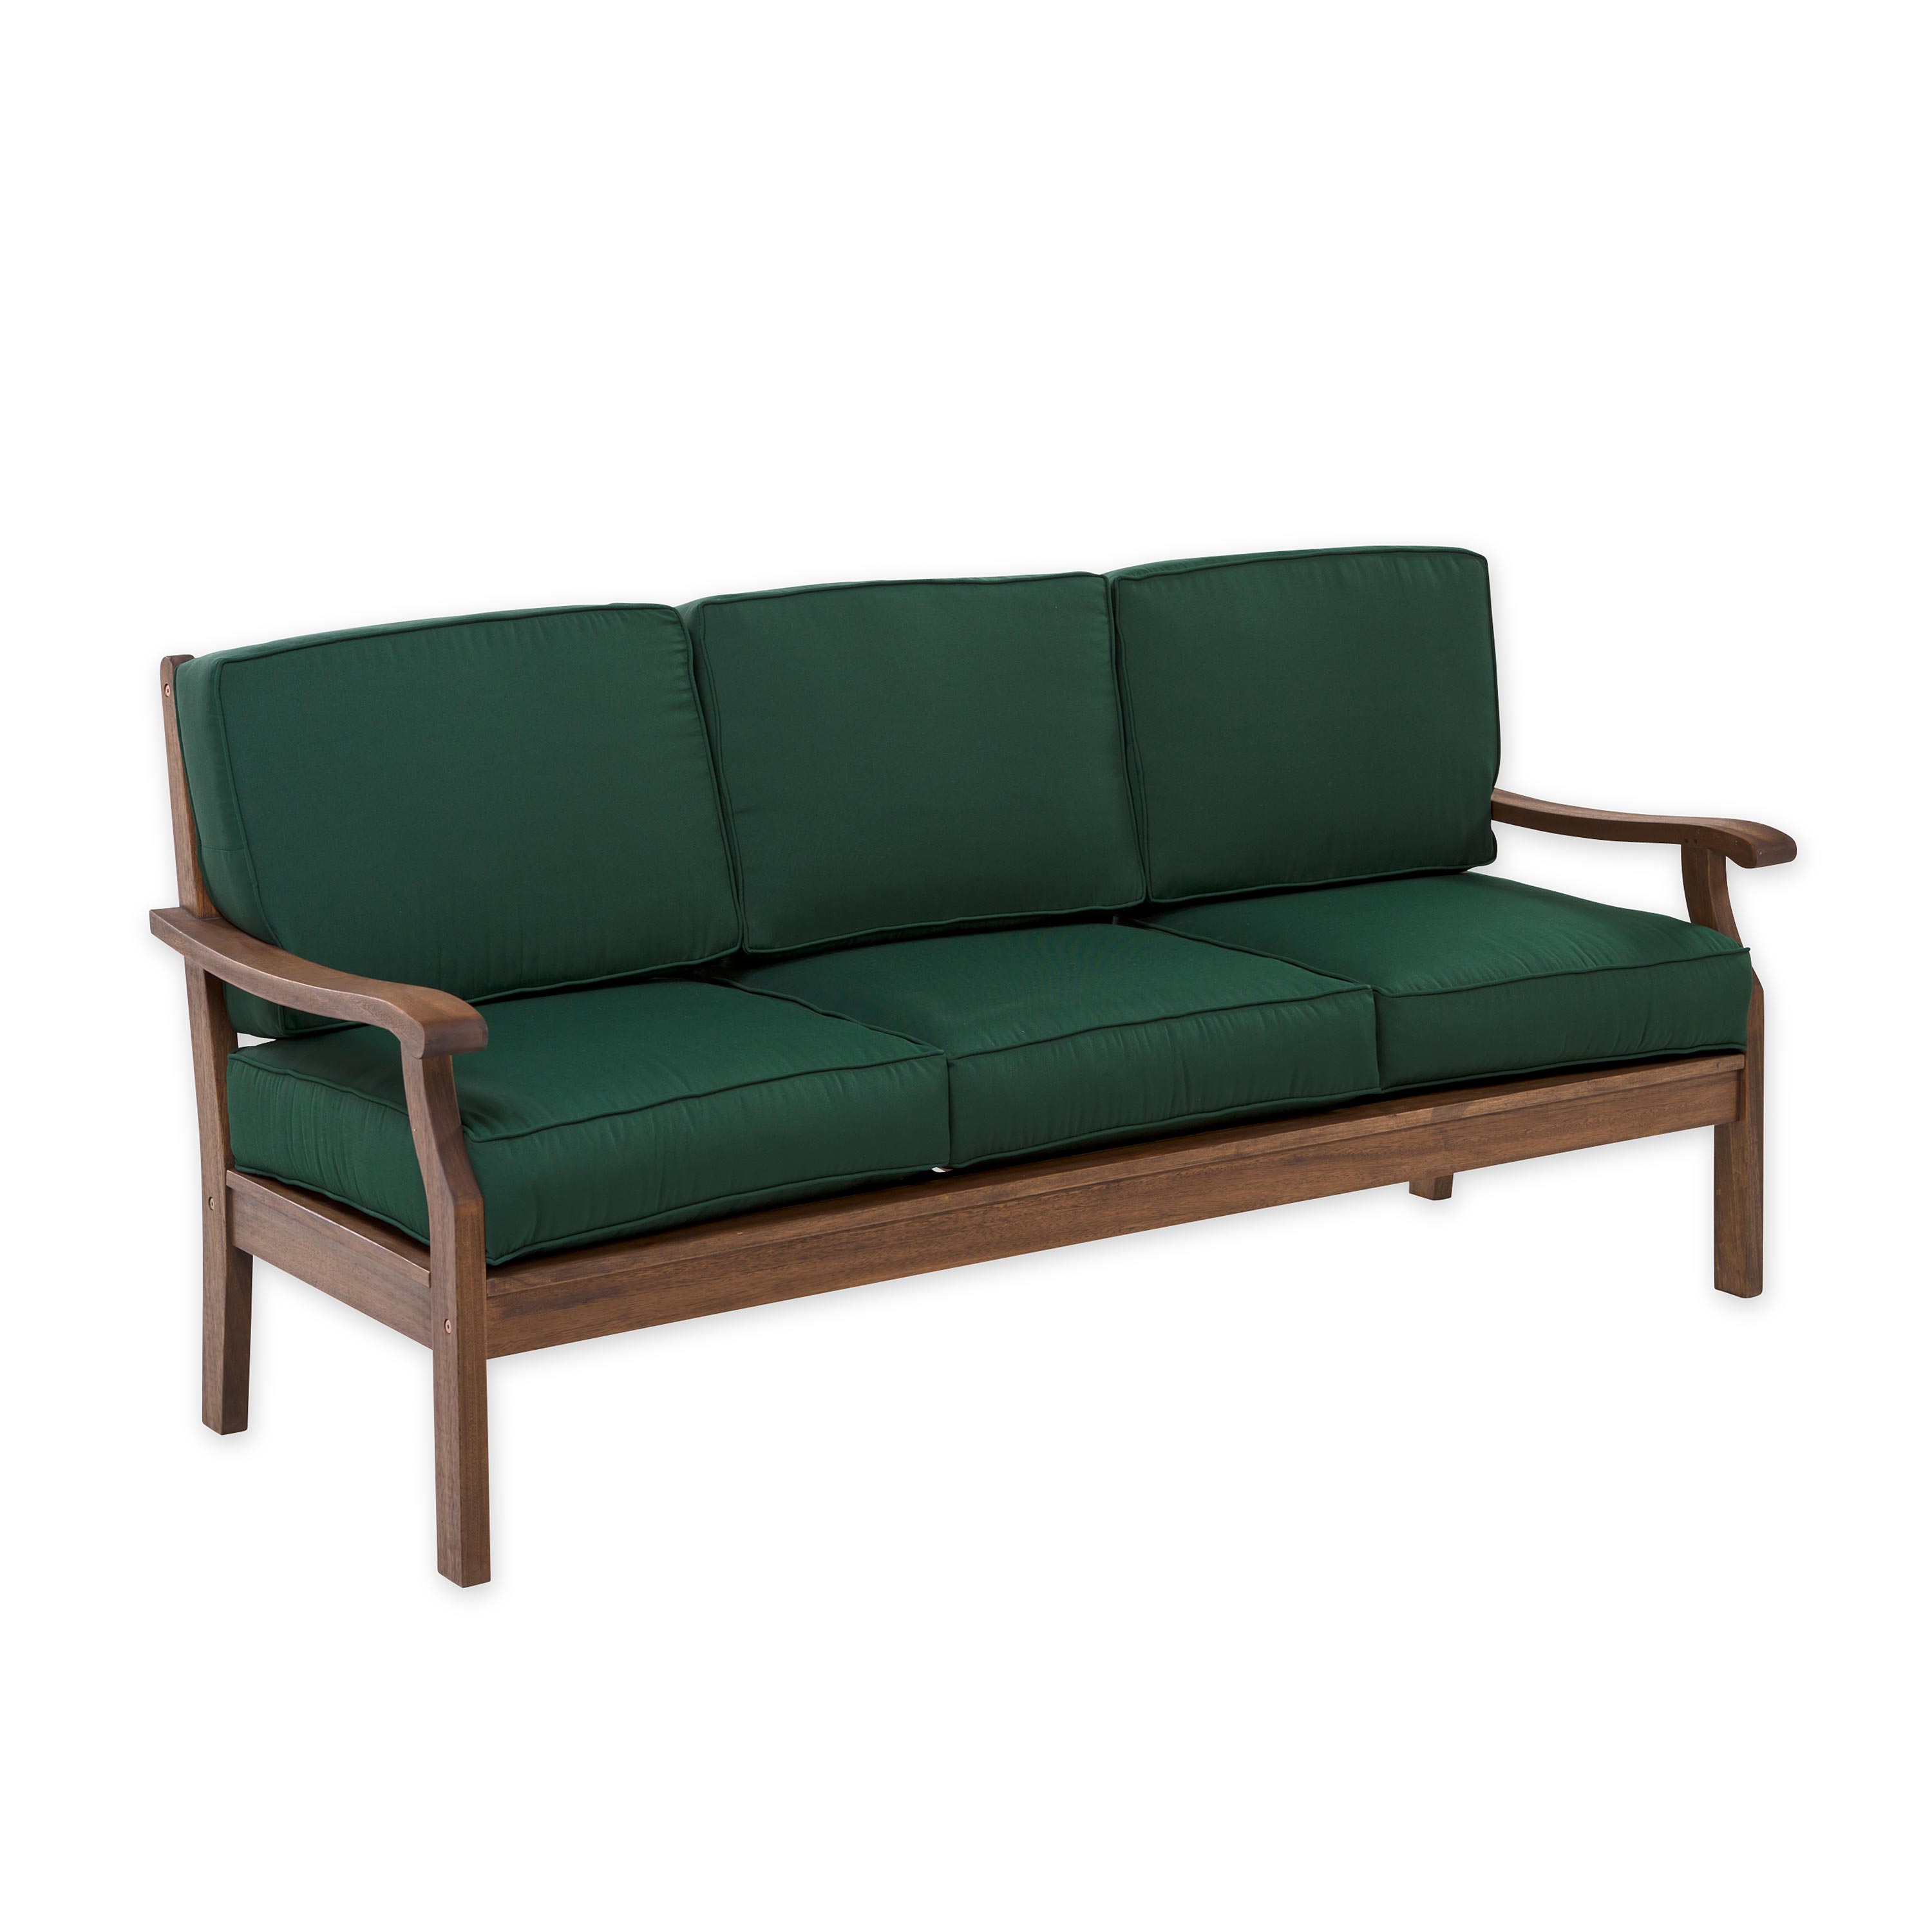 Claremont Sofa with Cushions